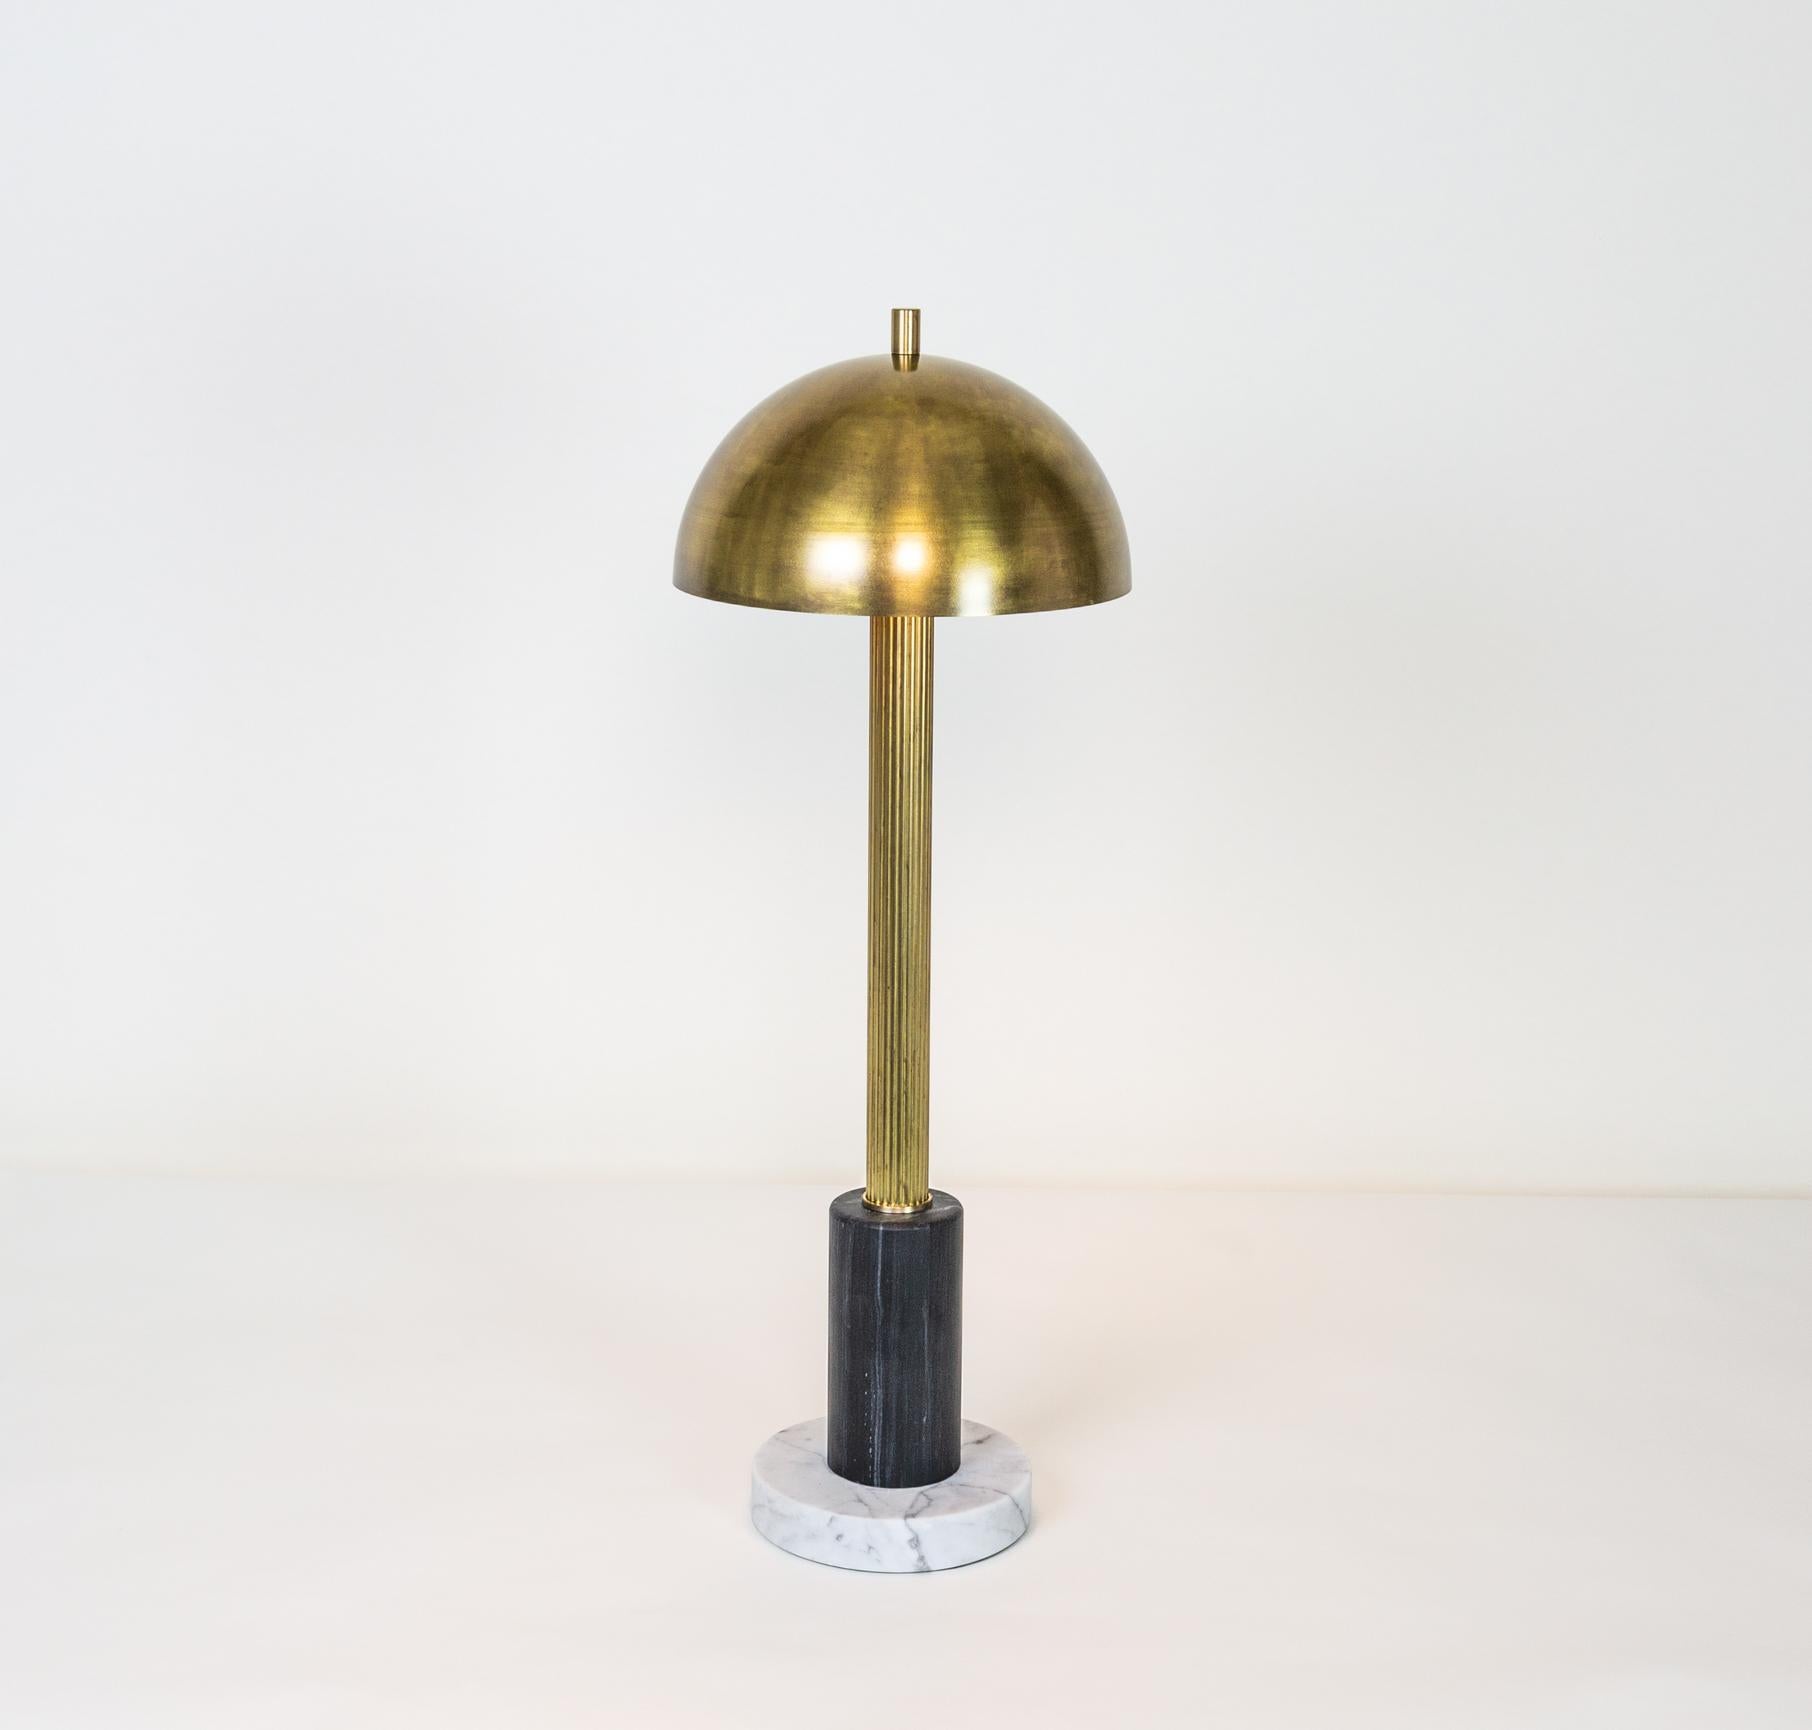 Pillar is a table lamp by Kalin Asenov. Black and white marble base, fluted column, supporting a brass dome. Antique brass, lacquer finish. The table lamp is part of the Meridian series including a ceiling pendants and a sconce listed on